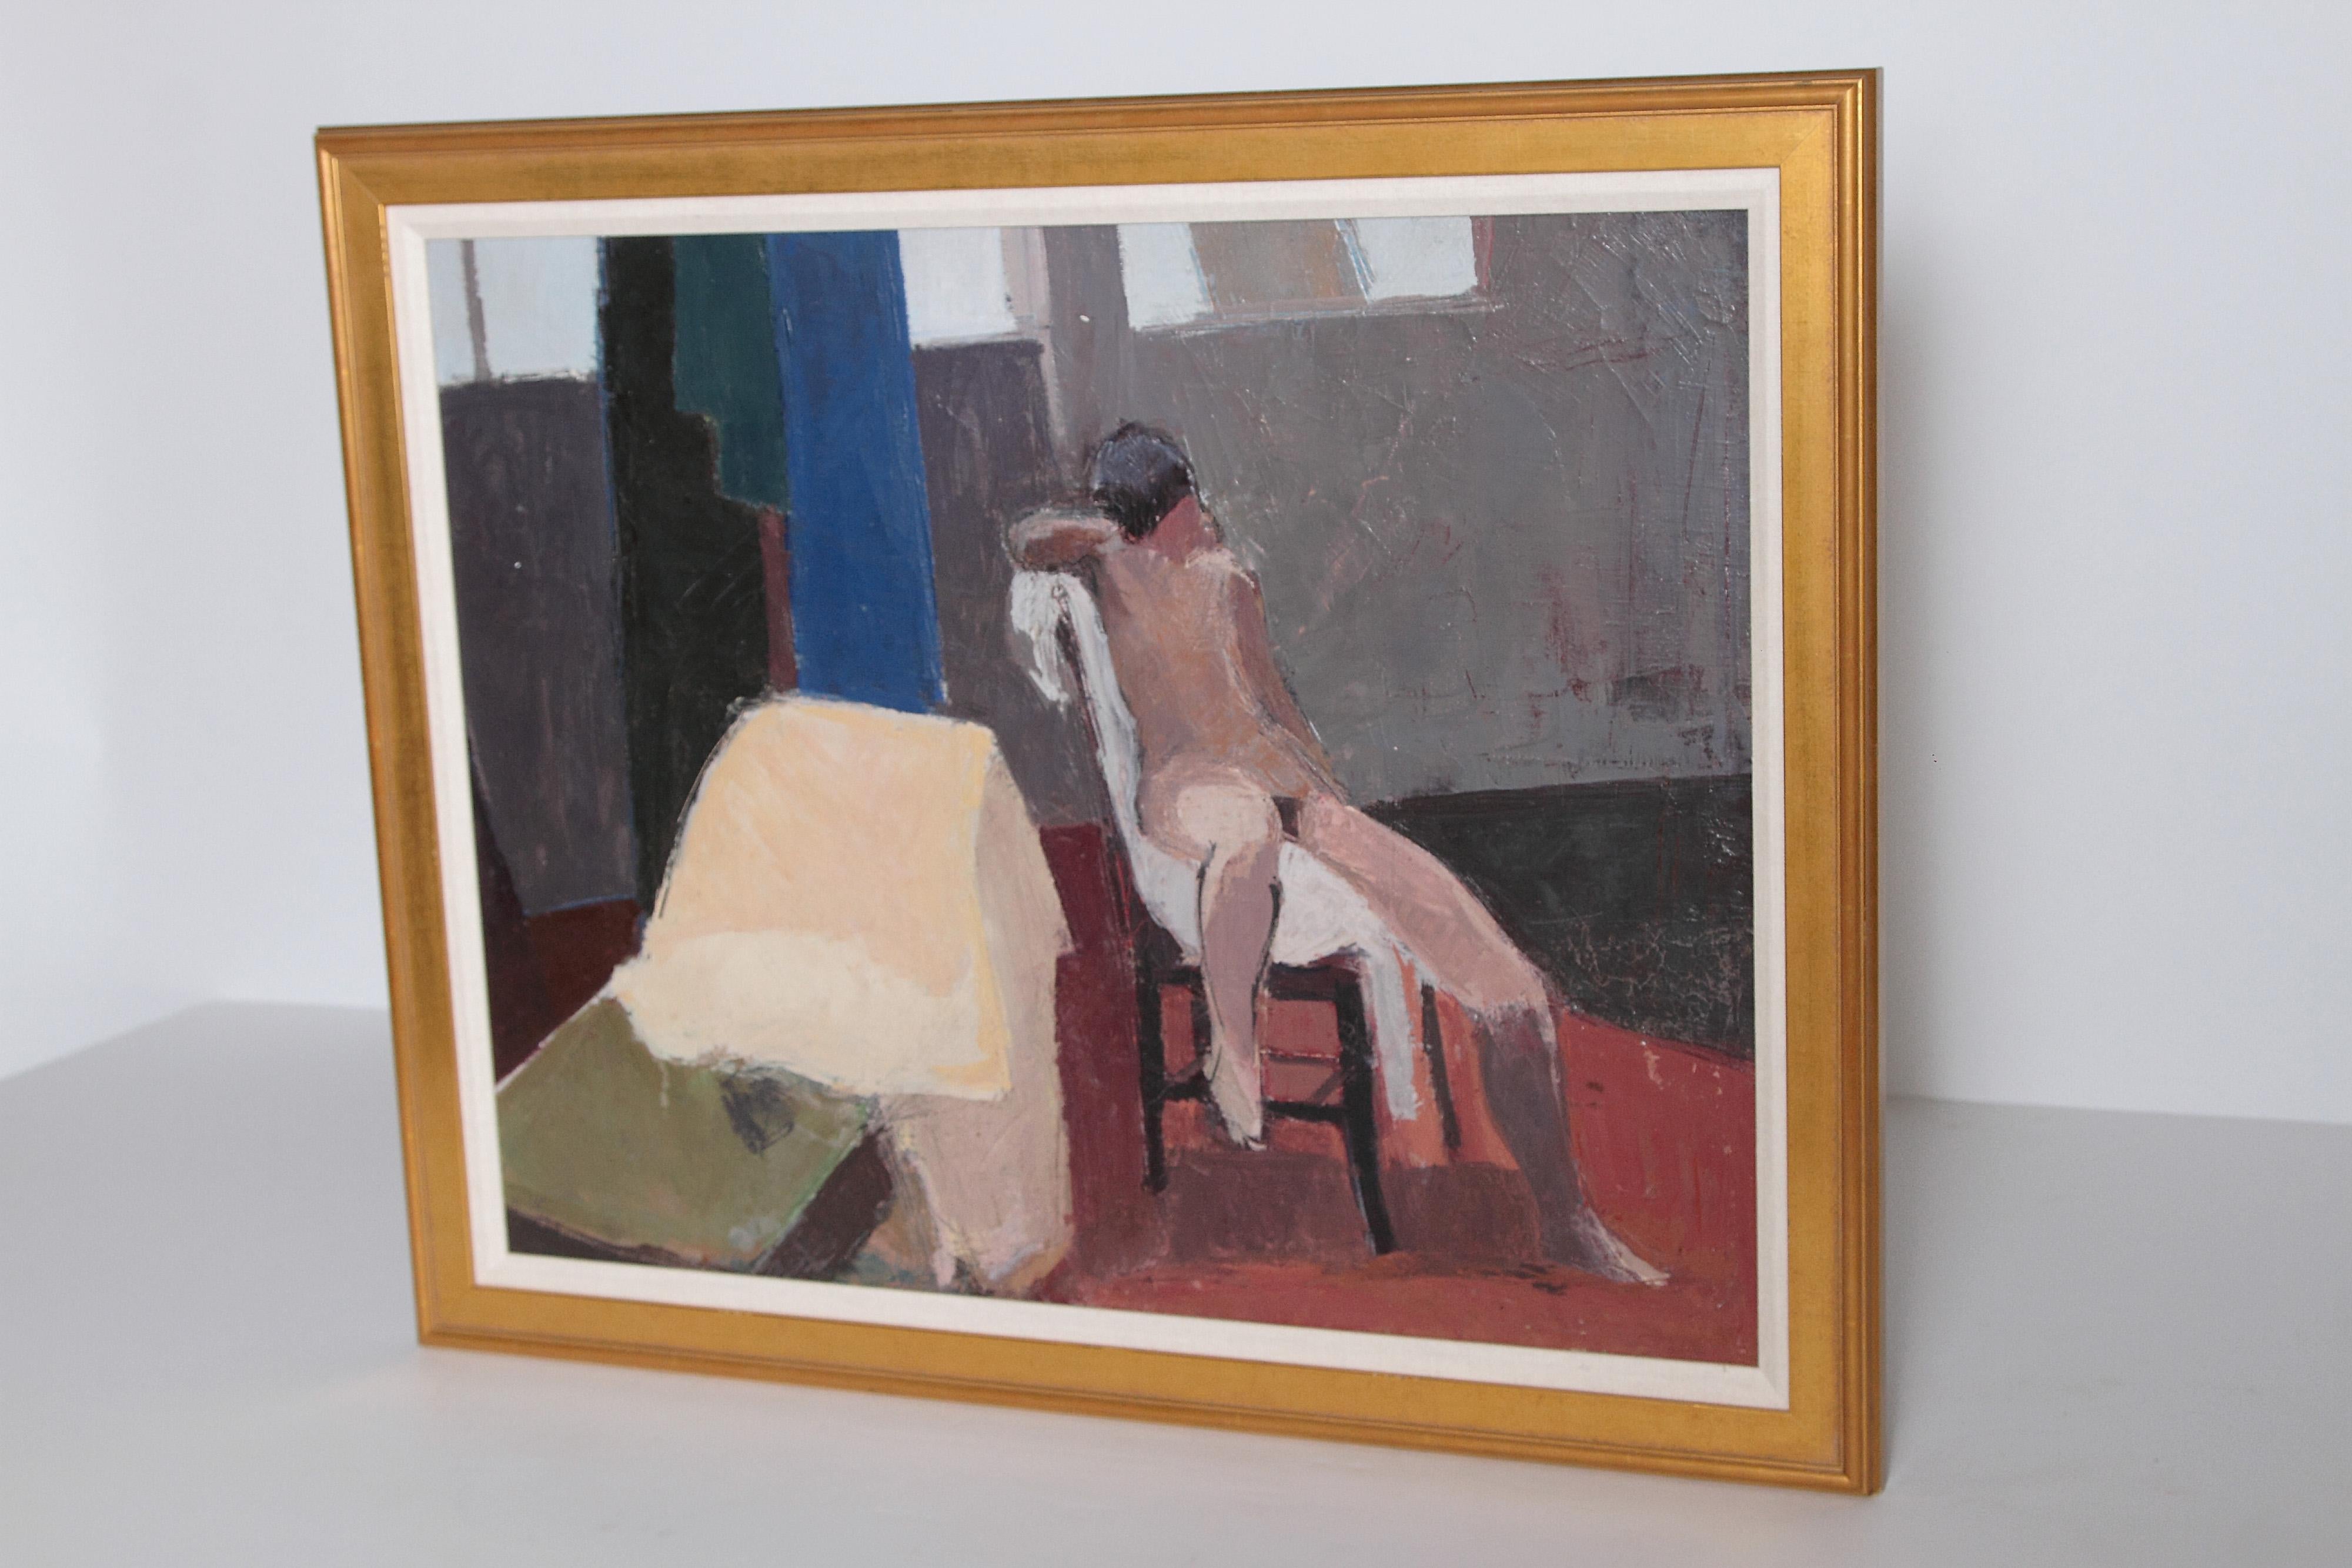 A contemporary oil on canvas of a nude in an interior seated on a chair in front of a wall with windows. Overall muted color palette of blue, green, gray, brown, red and cream. Framed in gold with a woven cloth liner. Signed 